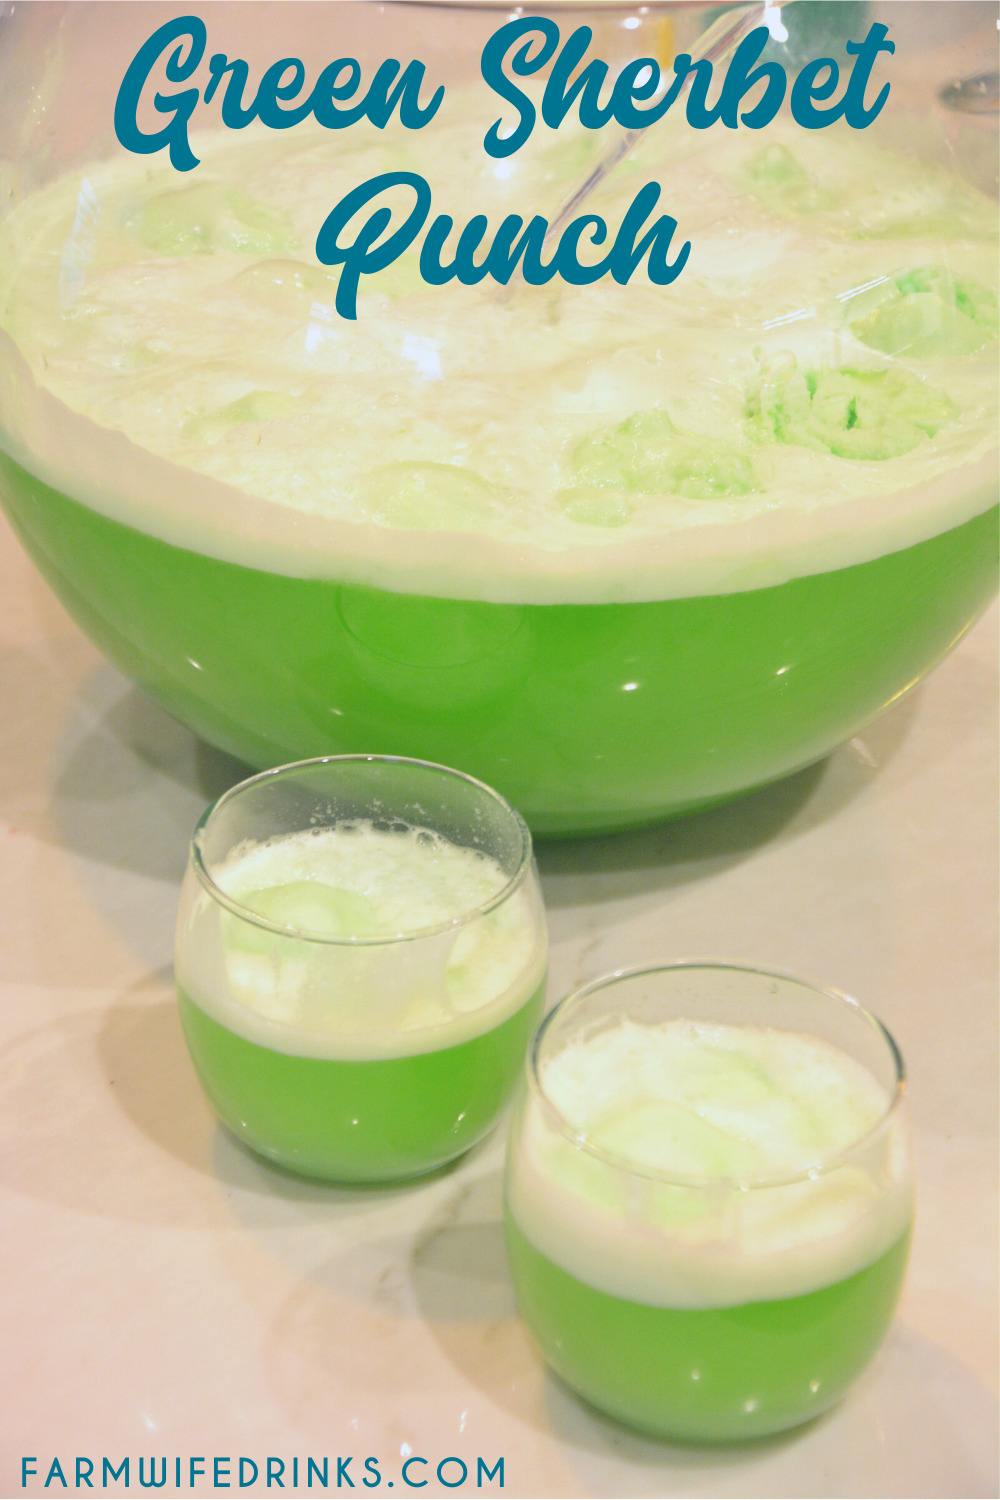 Green sherbet punch is a lime flavored green punch combining lemon-lime Kool-Aid, pineapple juice and sprite with lime sherbet for a fun and flavorful drink.